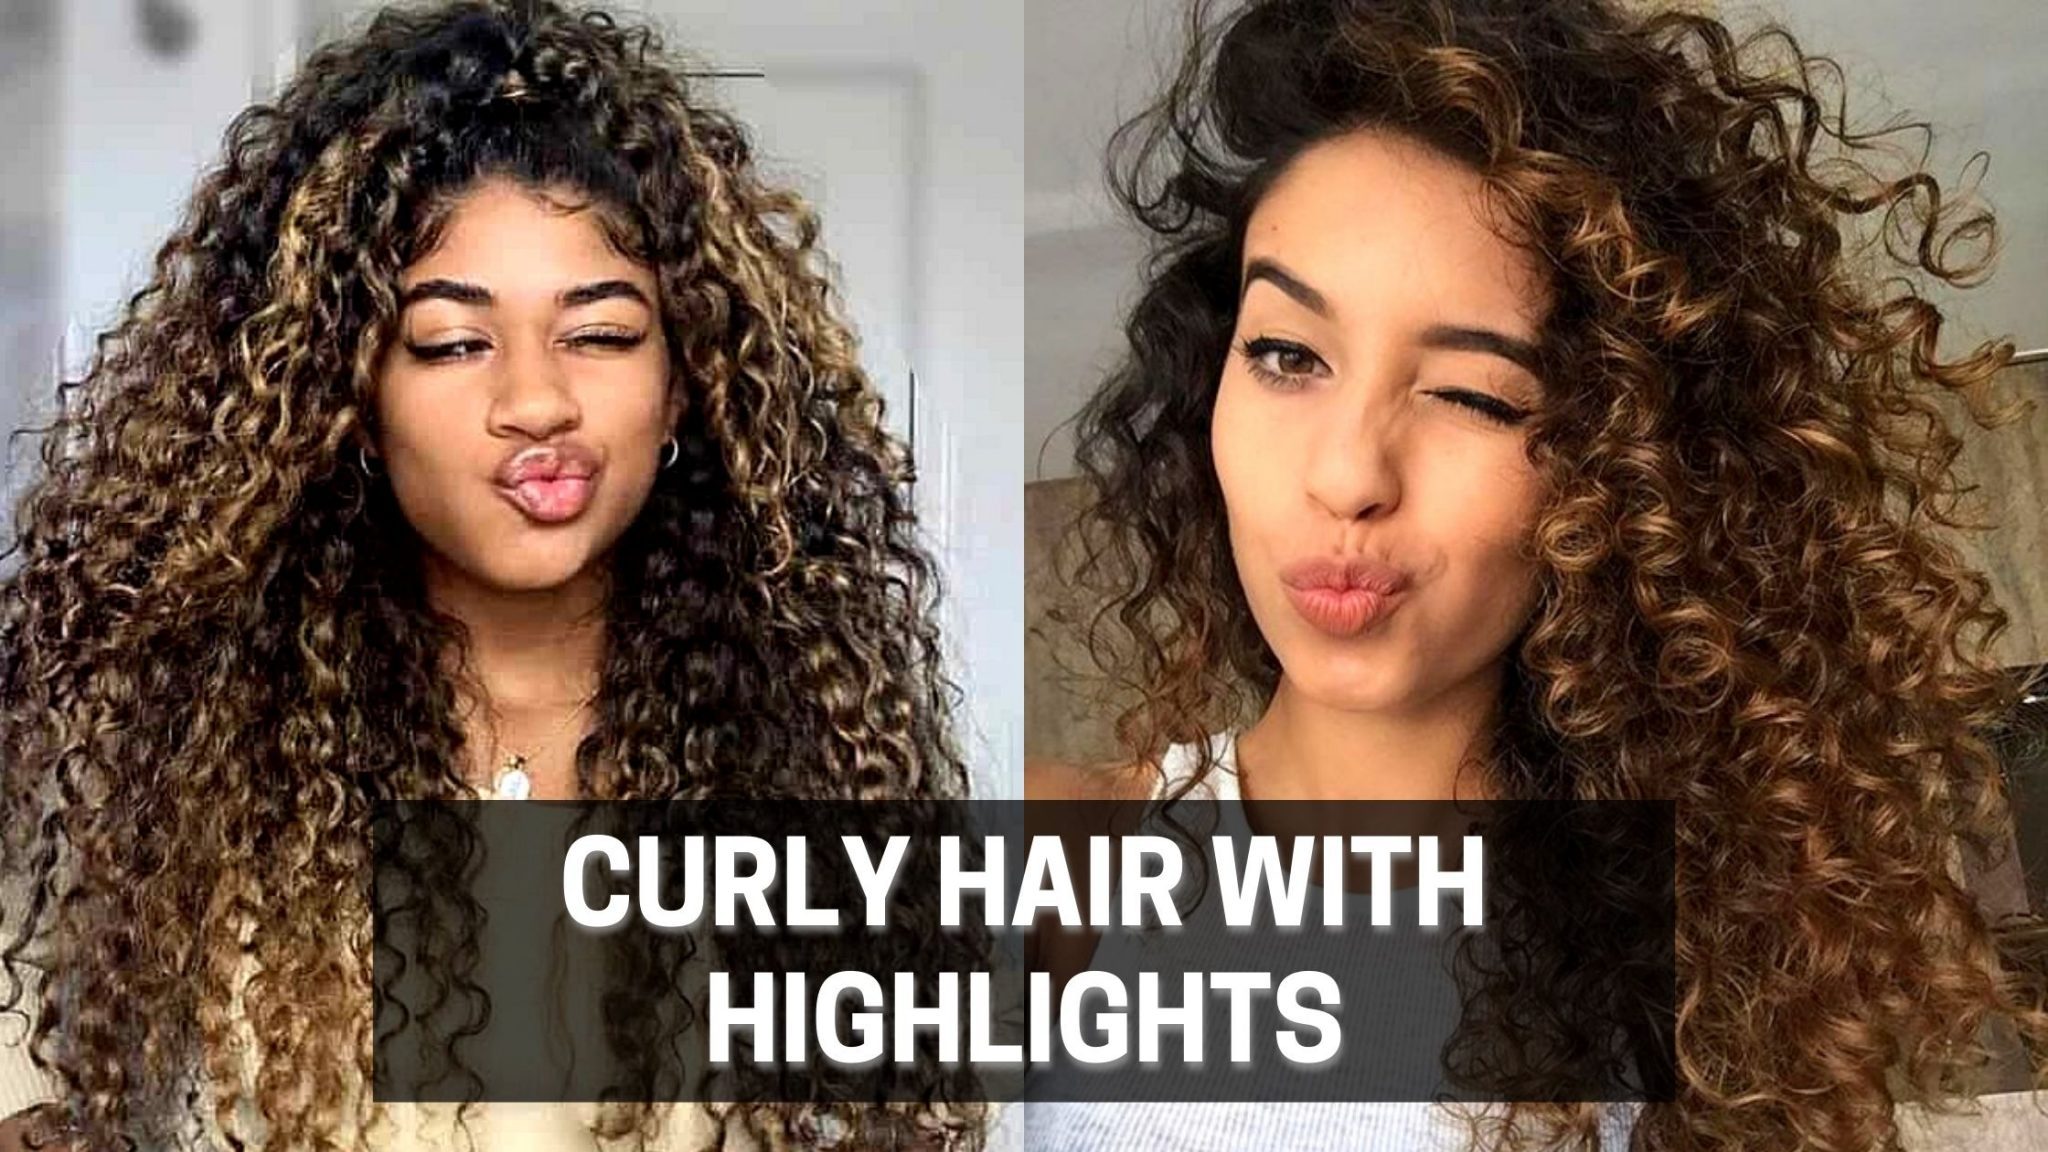 Curly hair with highlights: 10 photos of those who got it right when making